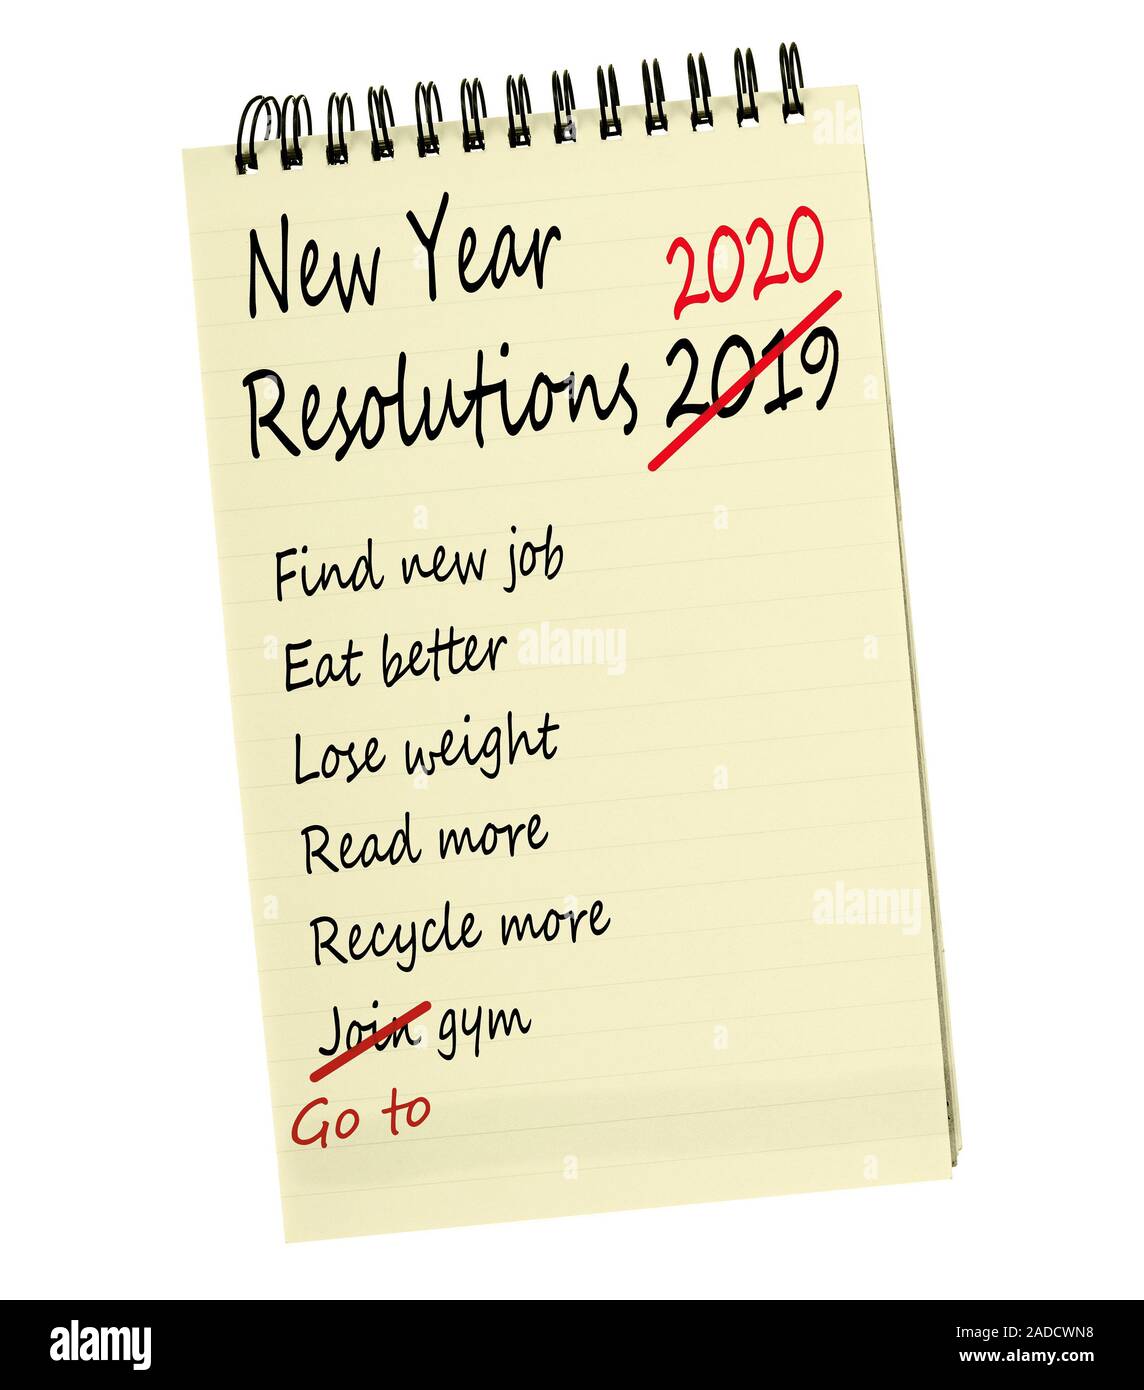 New year resolutions 2019 - same again. Notepad list isolated on white. Stock Photo